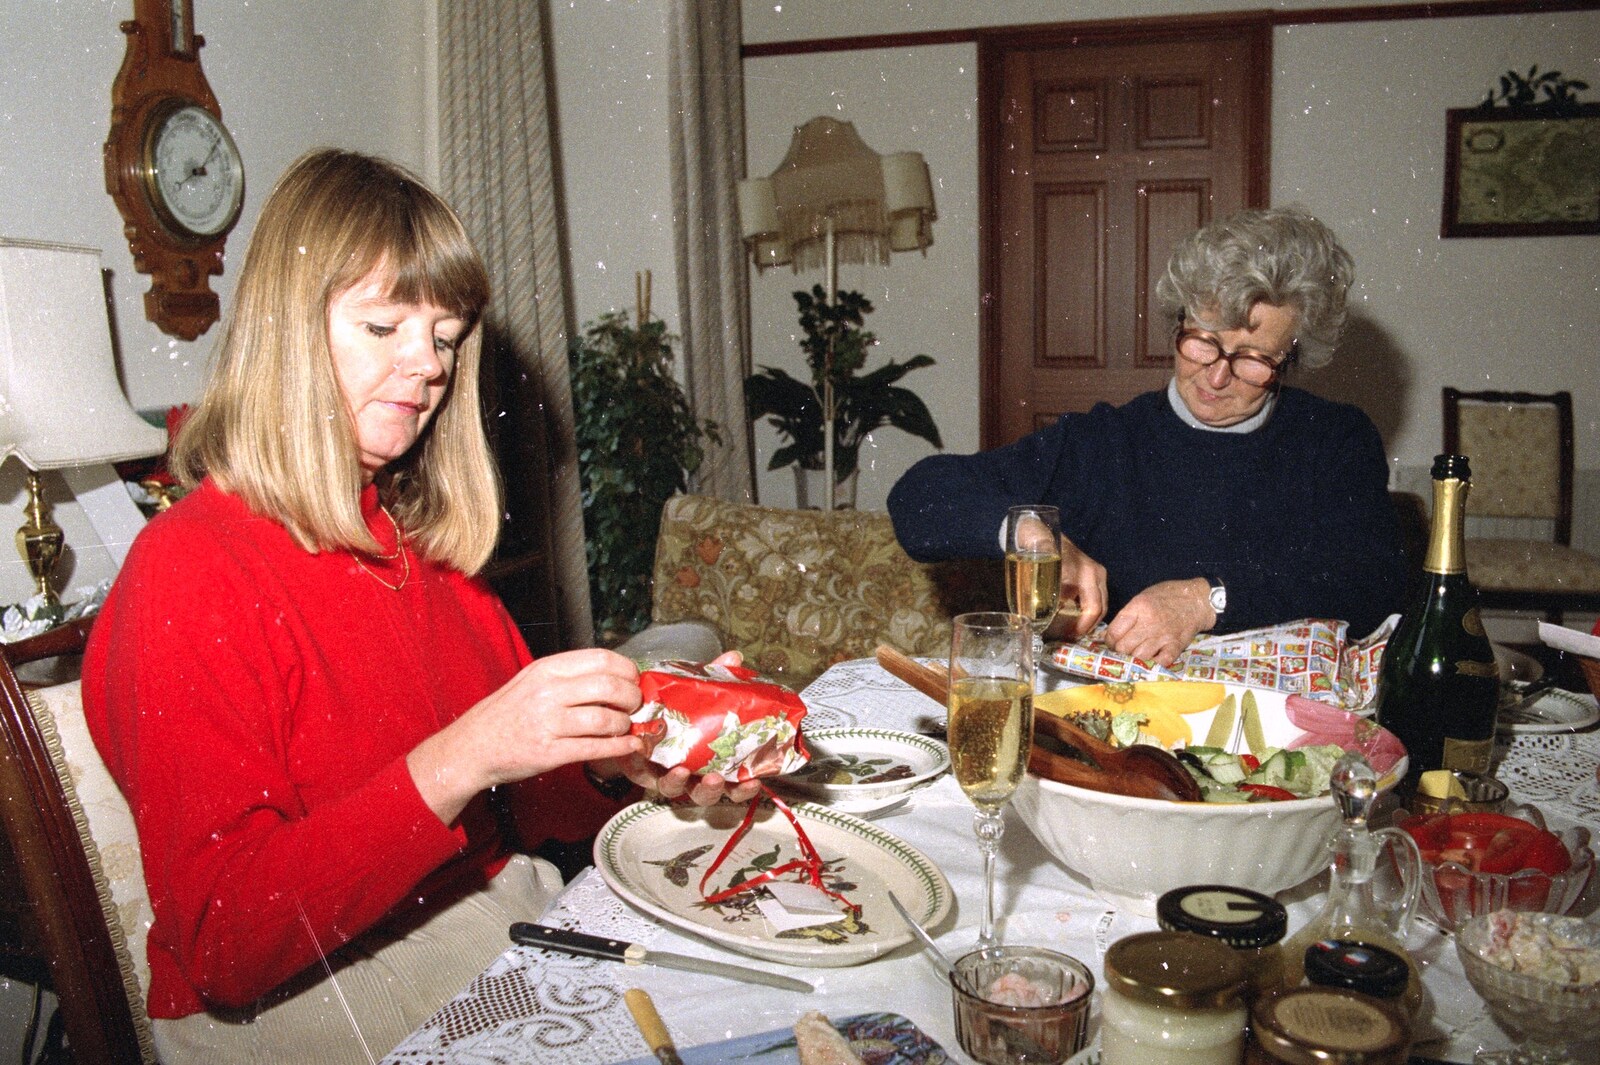 Mother inspects a present from Christmas in Devon and Stuston - 25th December 1991